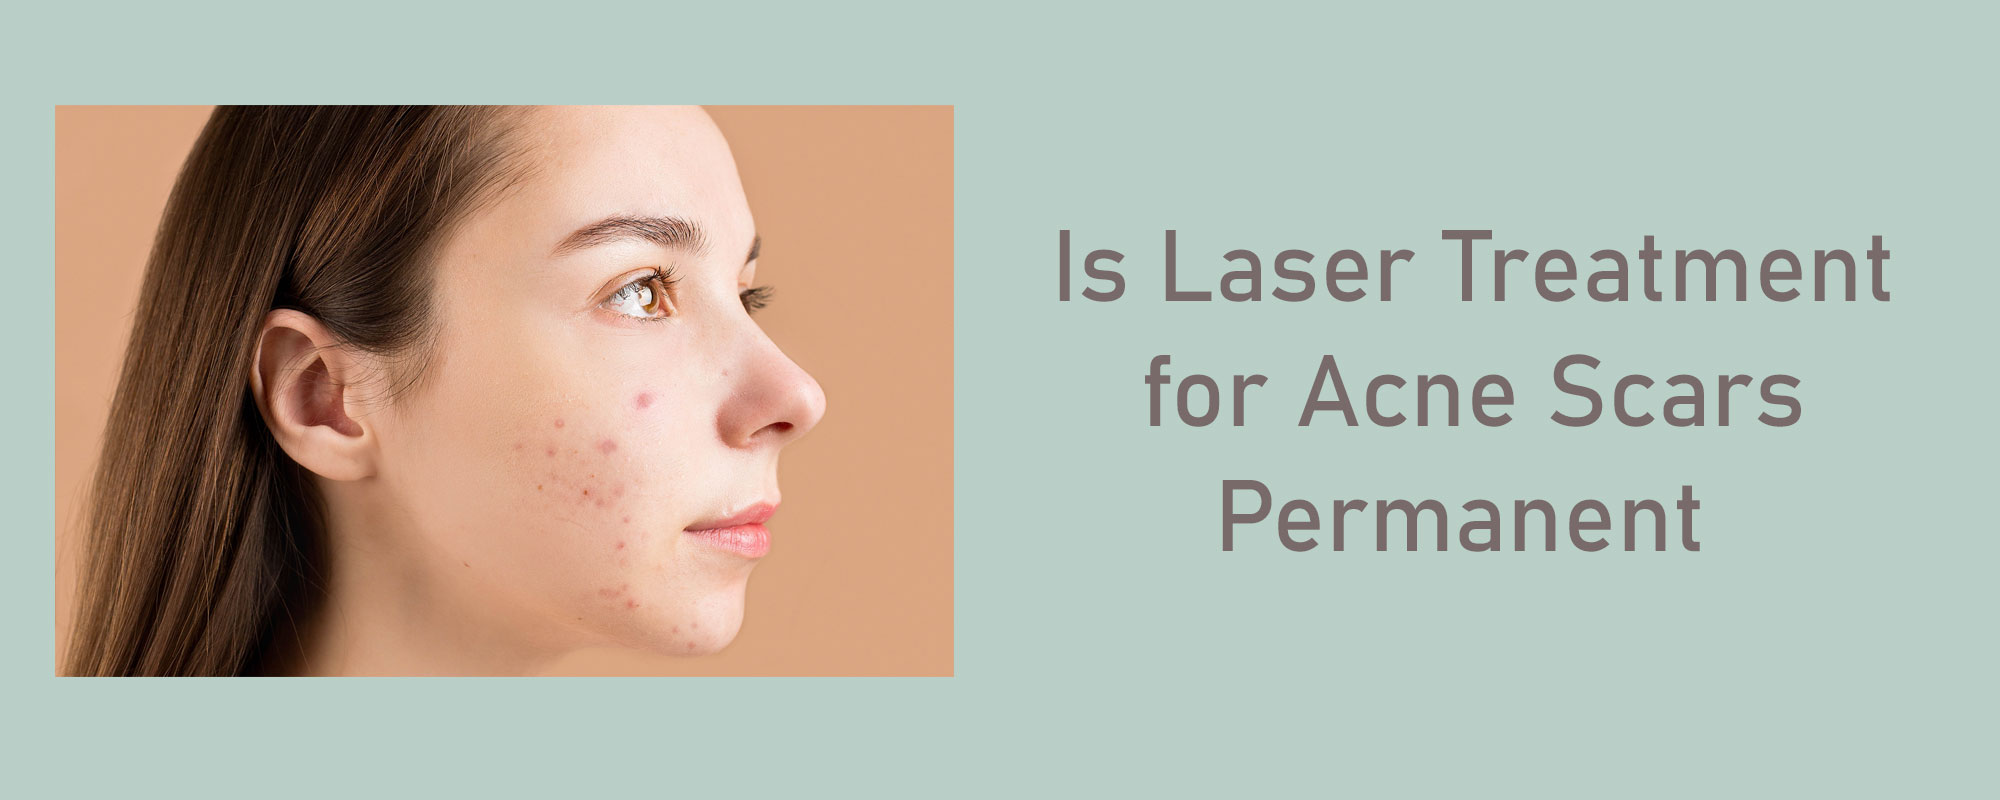 Is Laser Treatment for Acne Scars Permanent? - 1